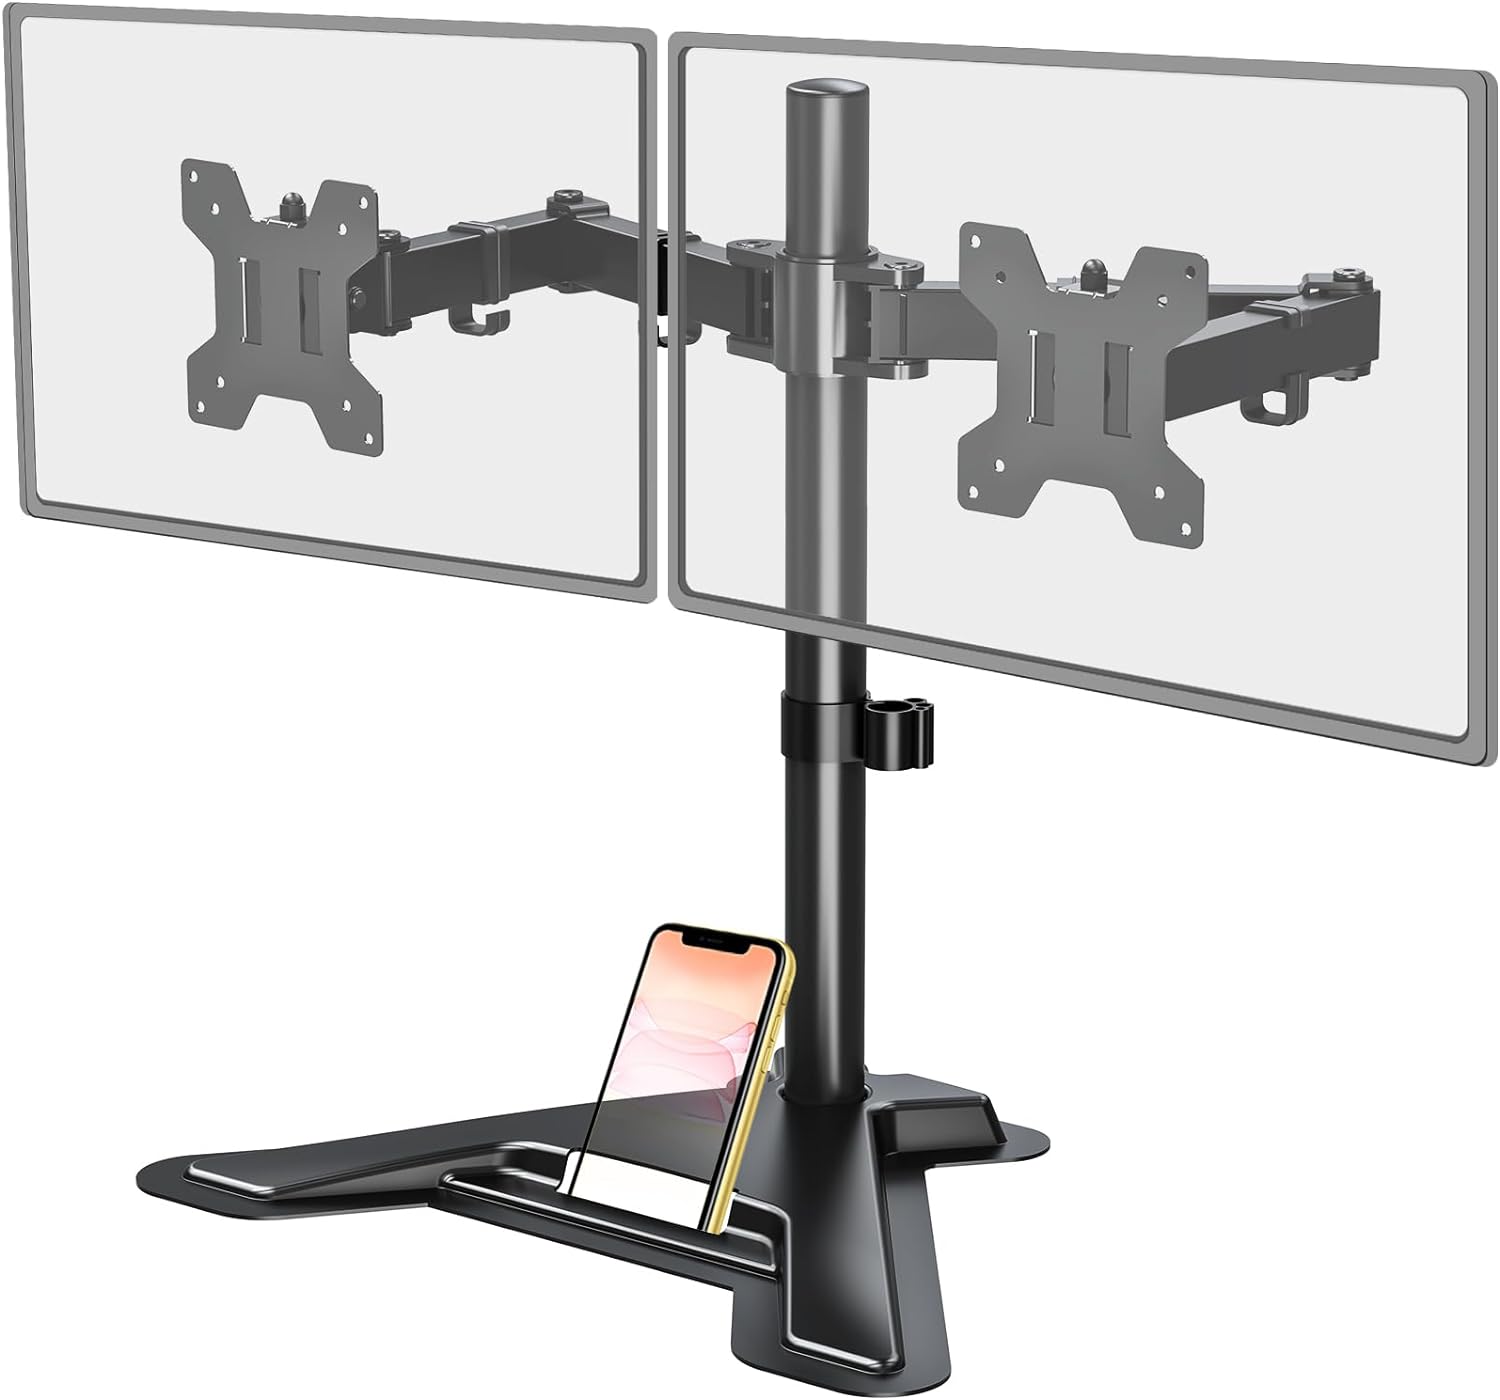 MOUNT PRO Dual Monitor Stand - Free Standing Full Motion Monitor Desk Mount Fits 2 Screens up to 27 inches,17.6lbs with Height Adjustable, Swivel, Tilt, Rotation, VESA 75x75 100x100, Black